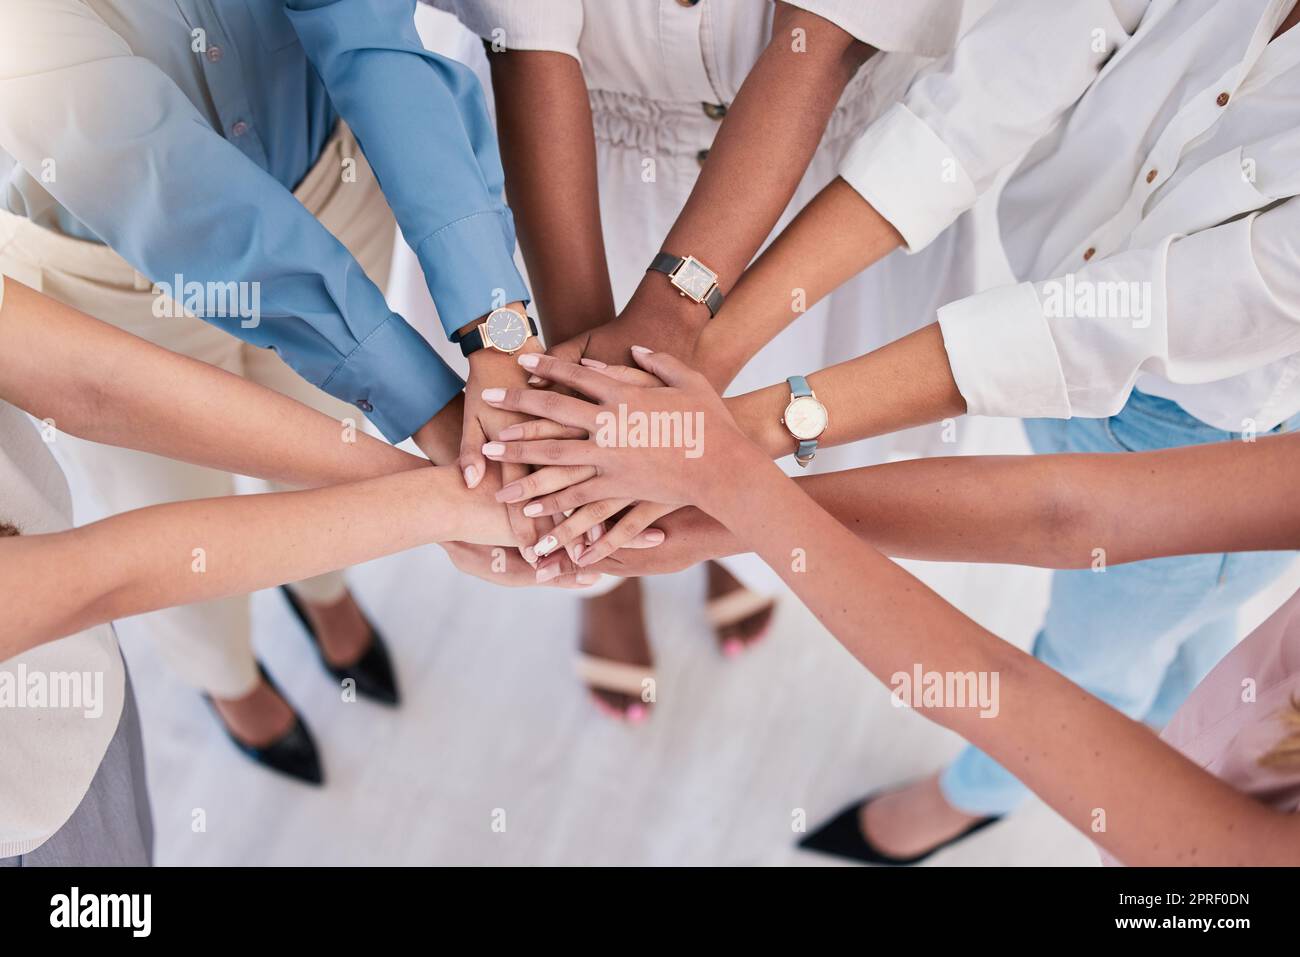 United, successful or ambitious businesspeople hands stacked together in a work office. Business professionals having fun standing with their hands piled for motivation during a meeting from above Stock Photo